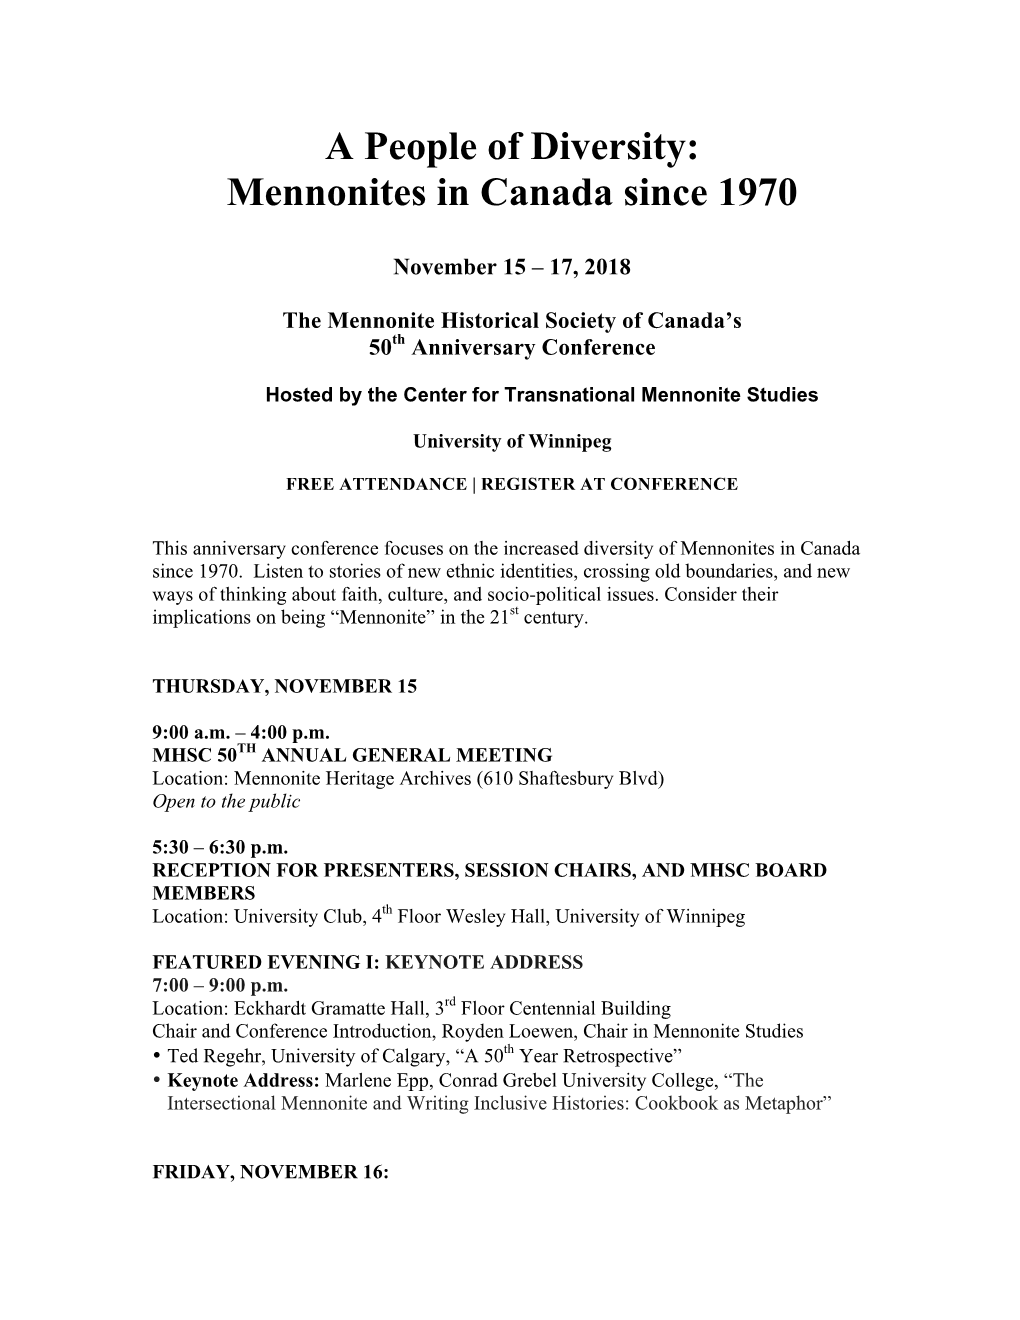 A People of Diversity: Mennonites in Canada Since 1970